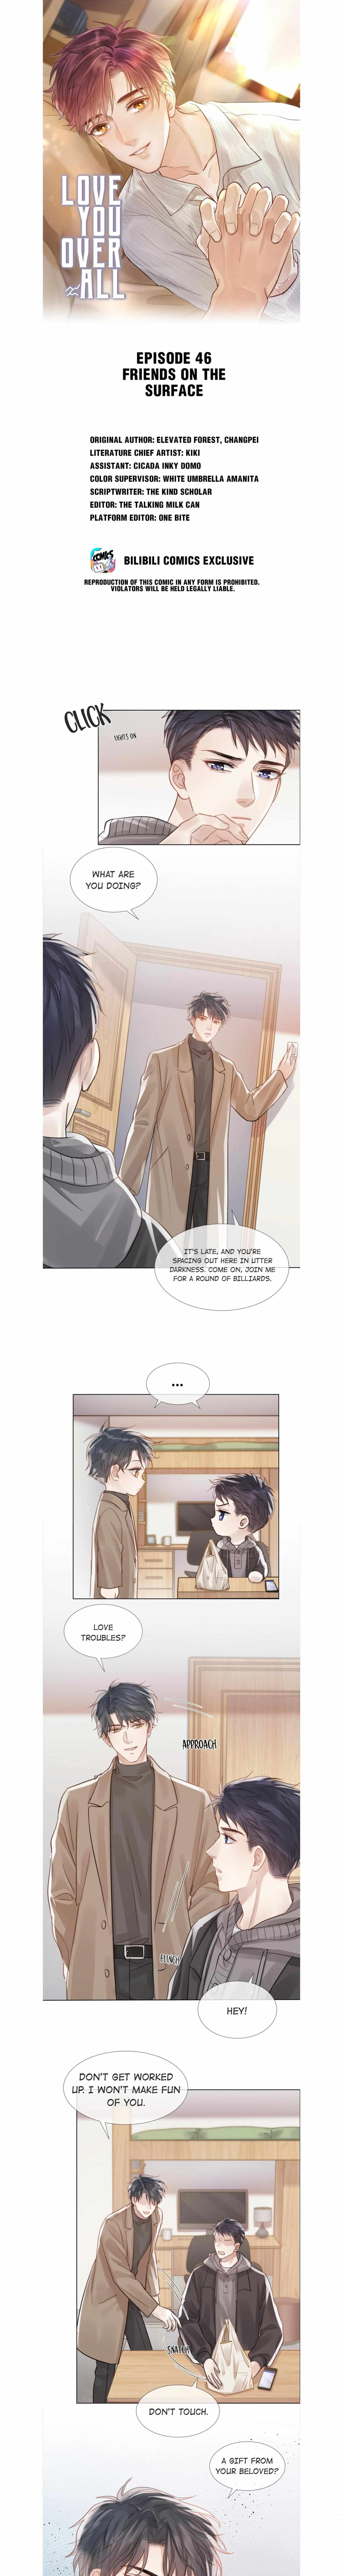 Love You Over All Chapter 46 - Picture 2